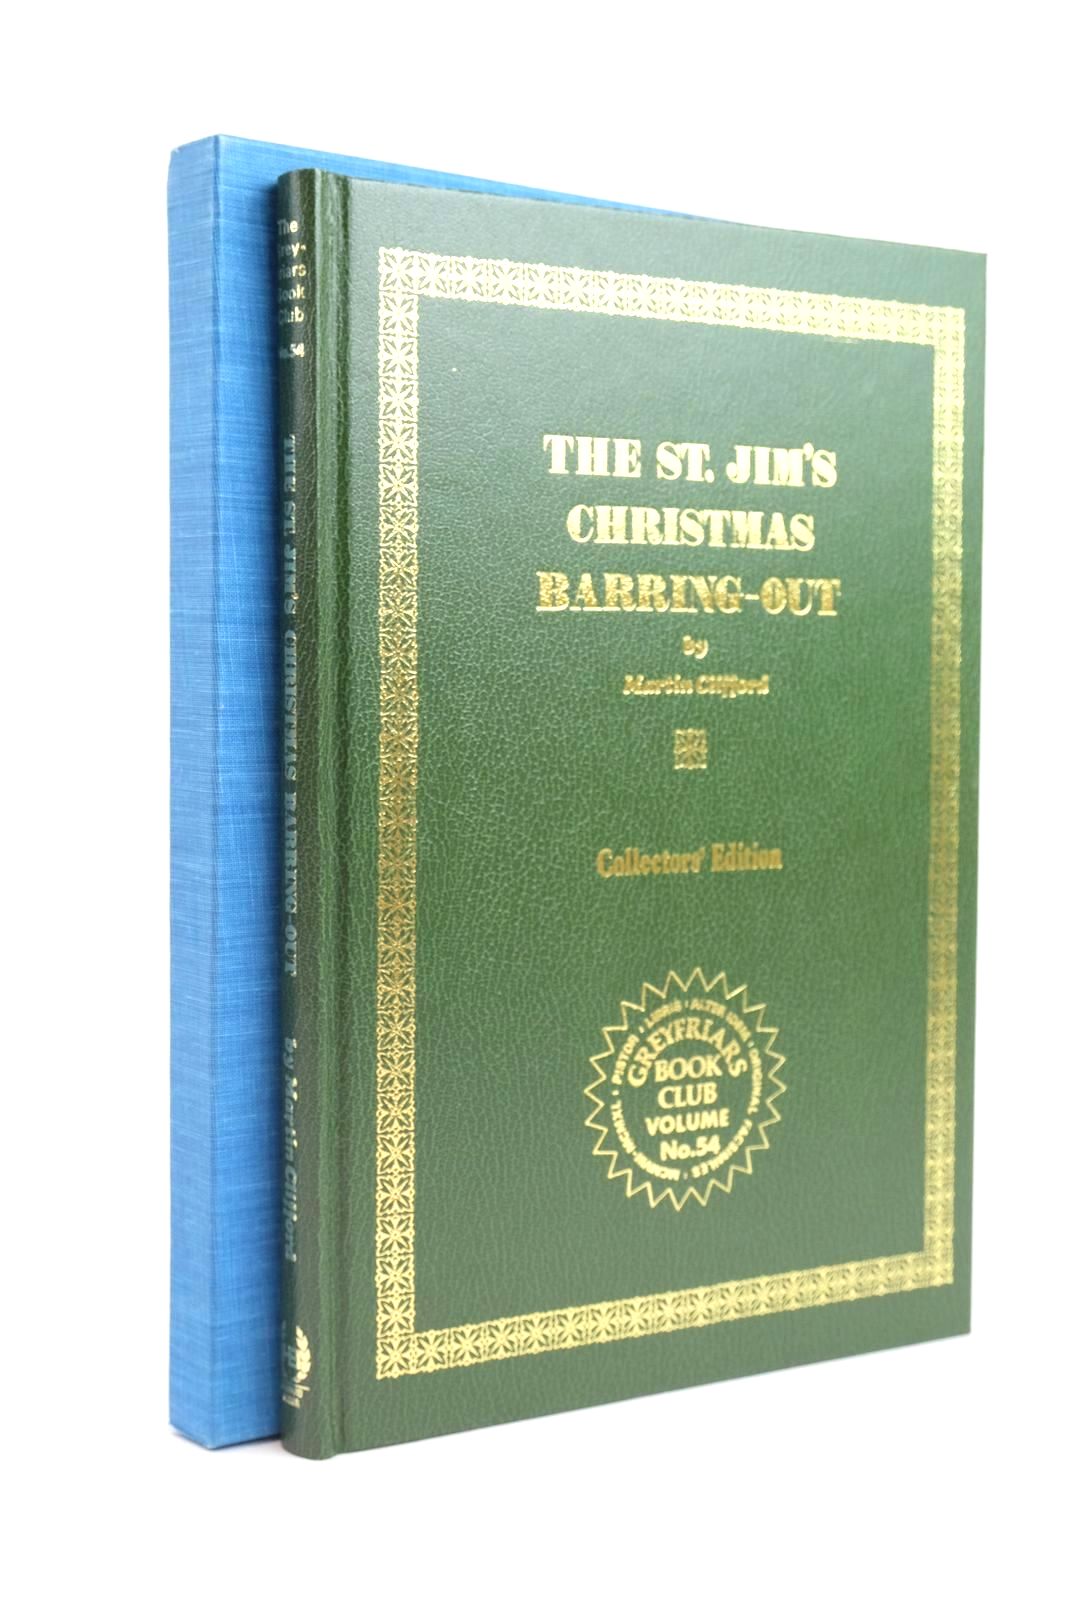 Photo of THE ST. JIM'S CHRISTMAS BARRING-OUT written by Clifford, Martin
Richards, Frank published by Howard Baker (STOCK CODE: 1319967)  for sale by Stella & Rose's Books